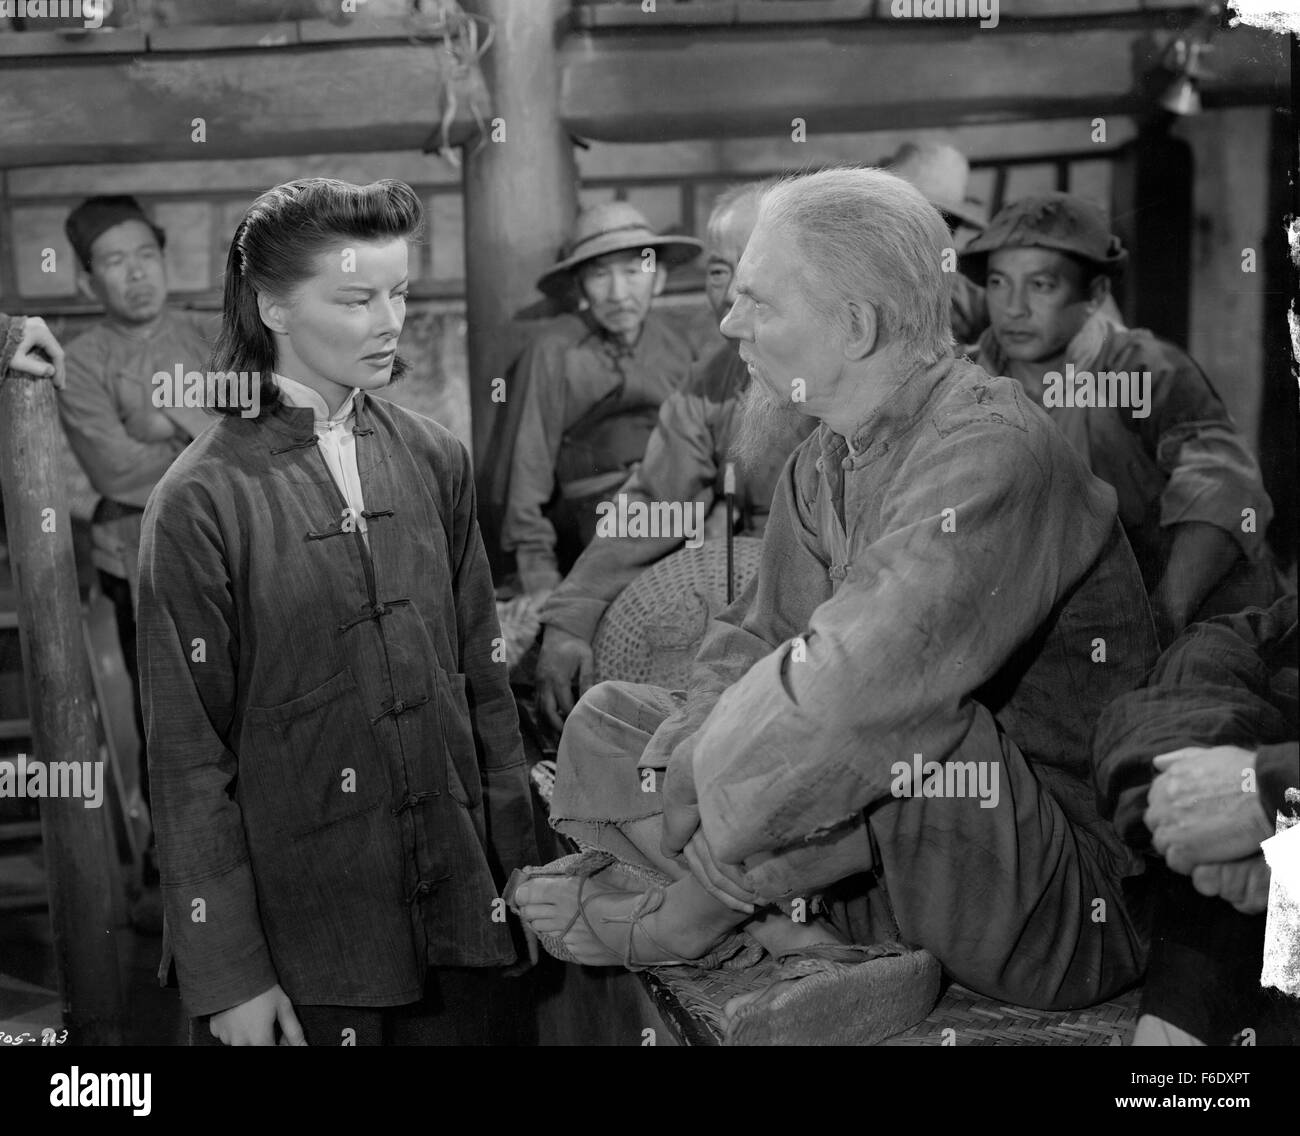 RELEASE DATE: July 20, 1944. MOVIE TITLE: Dragon Seed. STUDIO: Metro-Goldwyn-Mayer (MGM). PLOT: Ling Tang and his family live on his prosperous farm in rural Southern China and have not yet felt the impact of the Japanese invasion in the North. Tang's two oldest sons, Lao Ta Tan and Lao Er Tan are married and hard working while youngest son Lao San Tan remains a free spirit. Er's wife Jade is also willfully unconventional and desires to exercises her literacy skills by reading books, a most unfeminine practice in 1930's China. Tang's only daughter is married to Wu Lien, a city merchant who pro Stock Photo